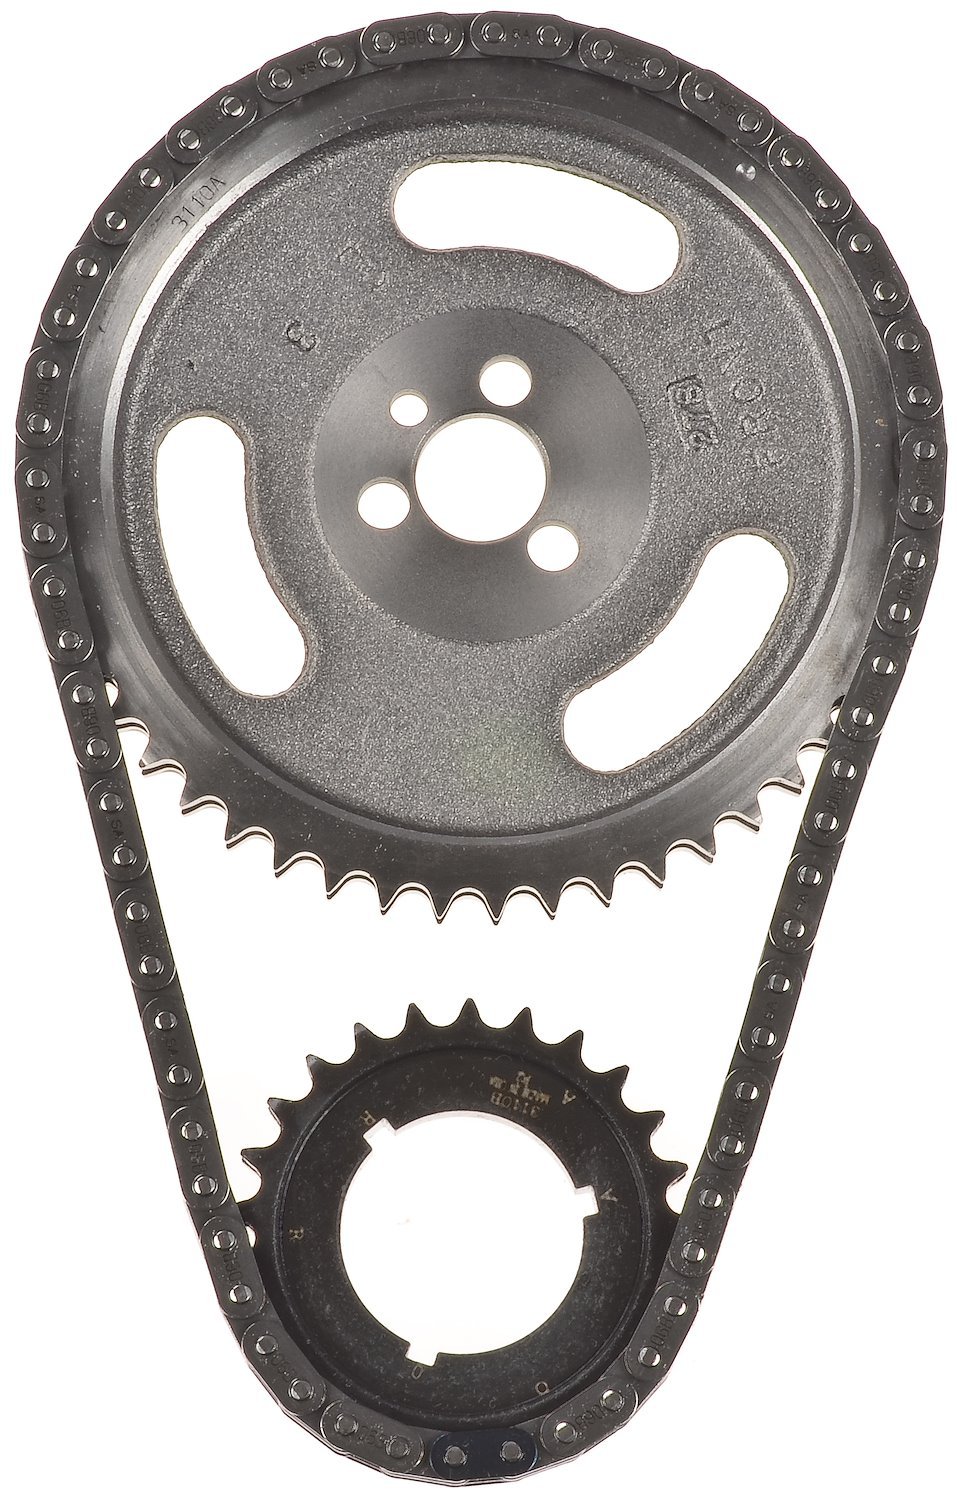 Timing Chain Set for 1968-1990 Big Block Chevy 396-454